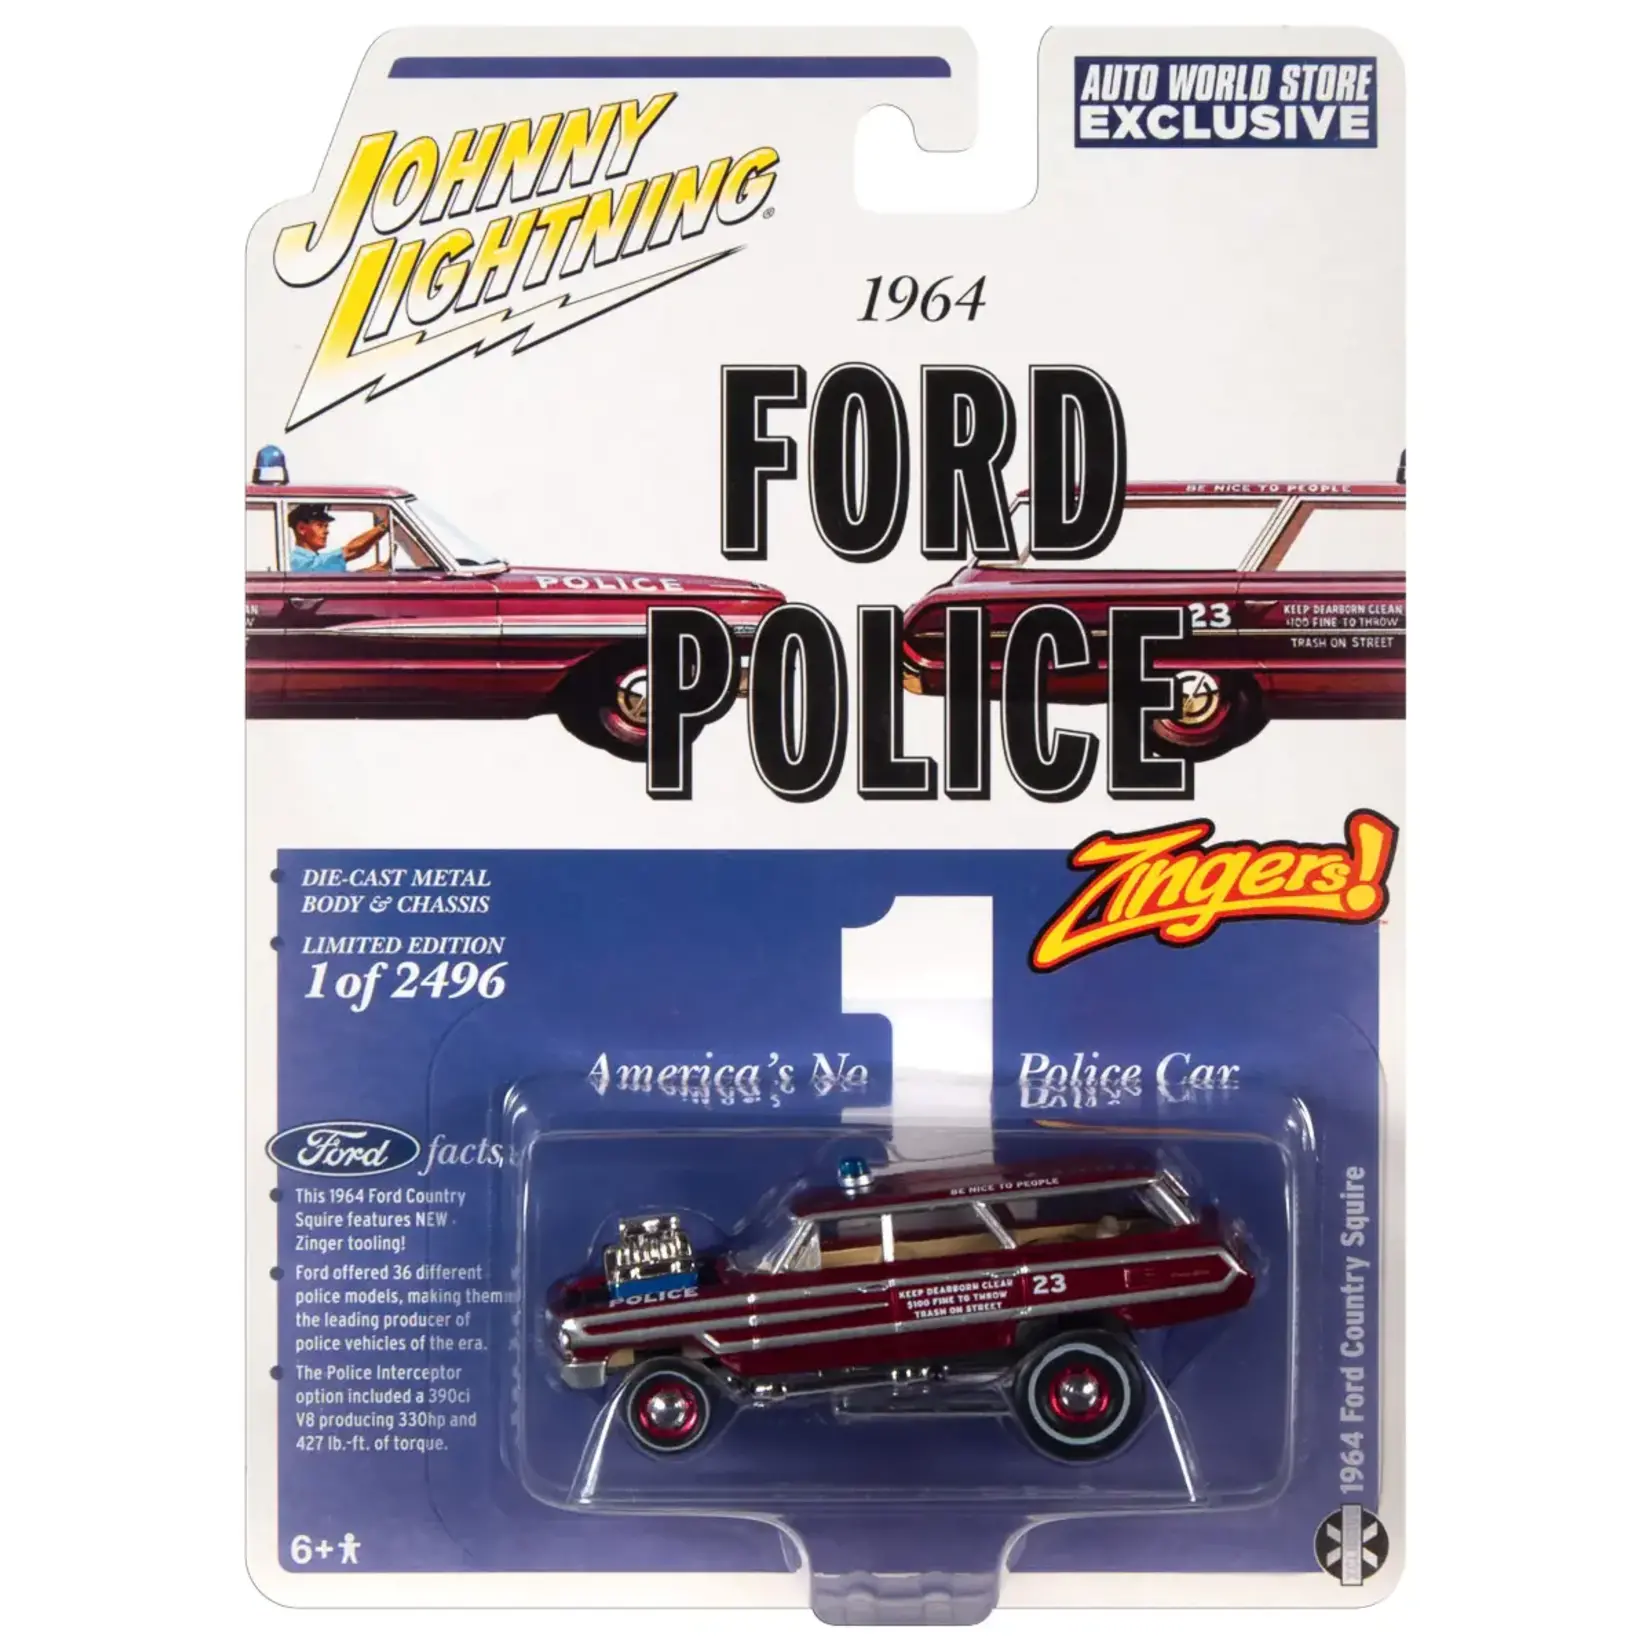 Johnny Lightning SCM133 Johnny Lightning Street Freaks Zinger 1964 Ford Country Squire (Auto World Store Exclusive)